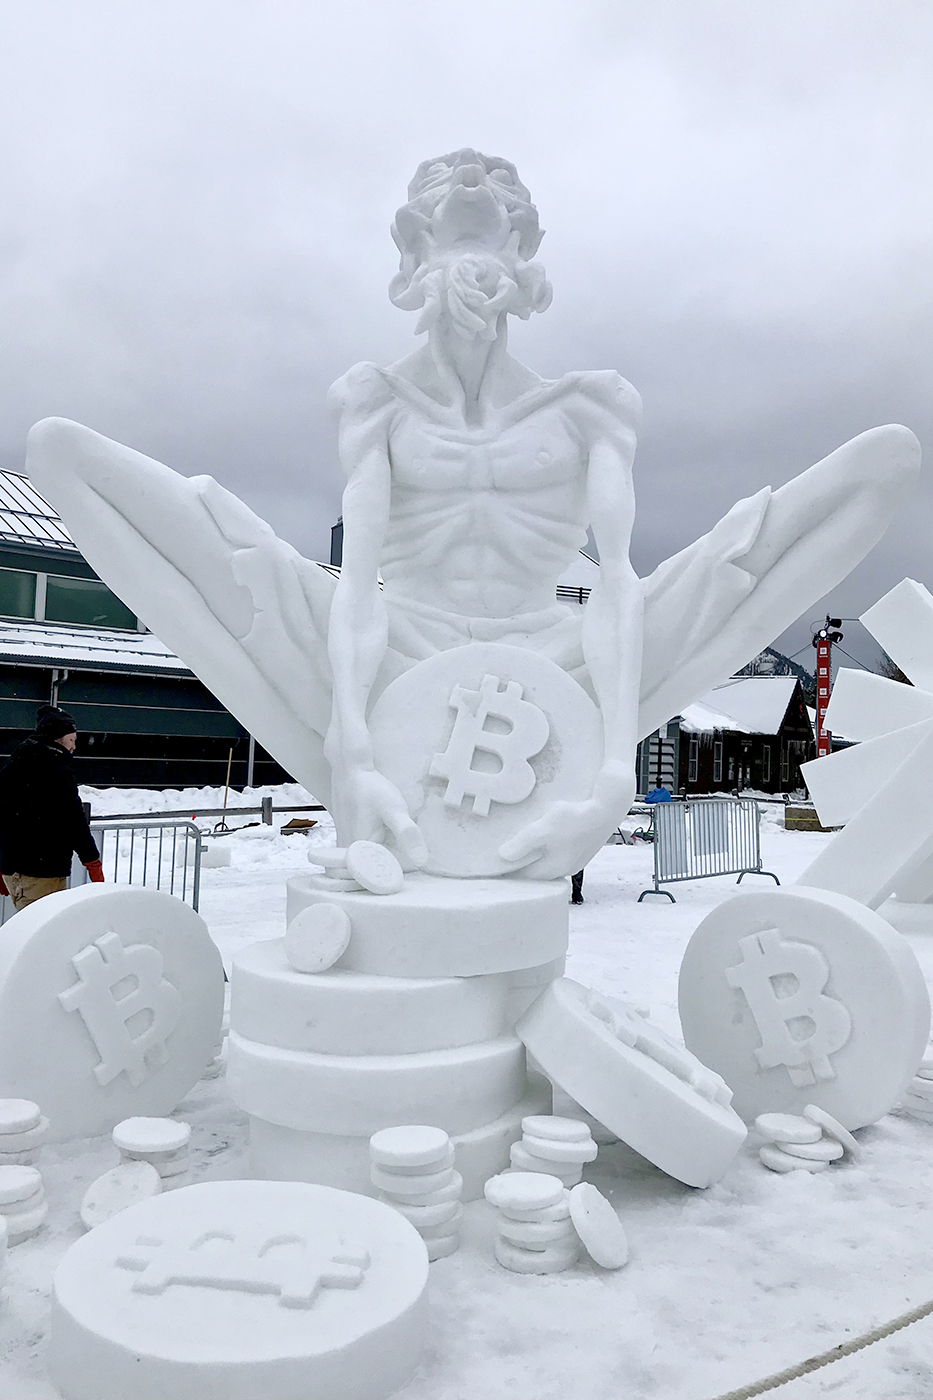 A snow sculpture resembling a figure clutching a coin emblazoned with the letter 'B' on its face.